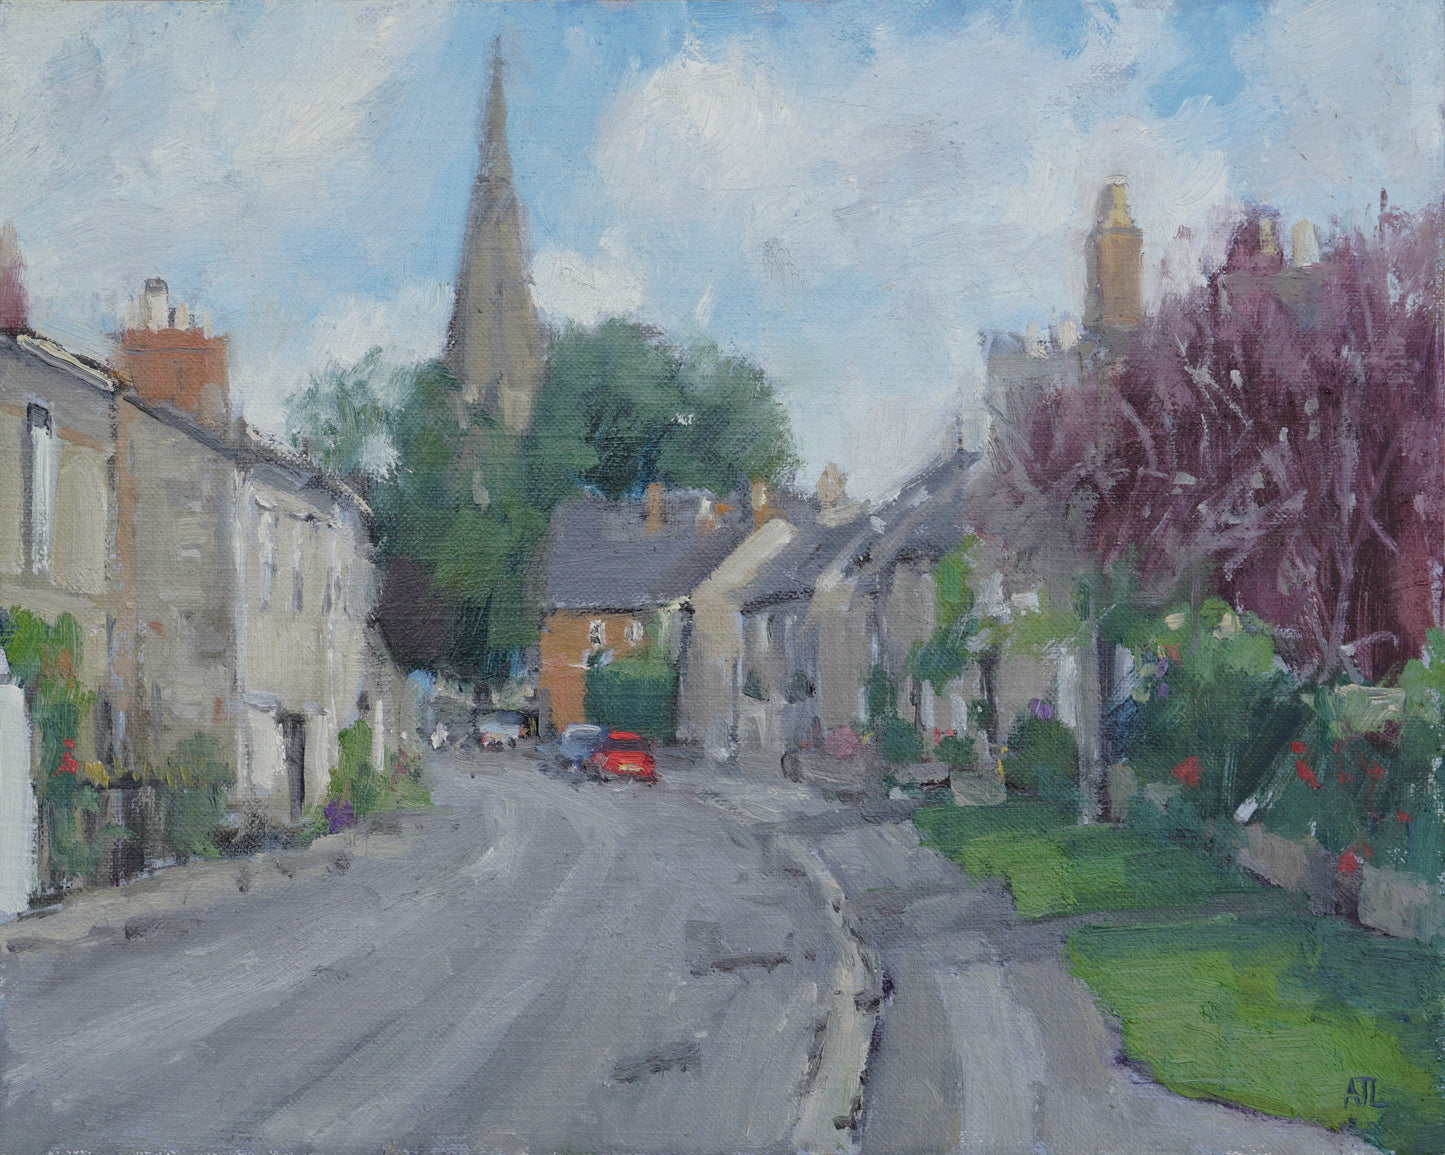 oil painting depicting a small street in Bampton, Oxfordshire, with a church spire in the distance